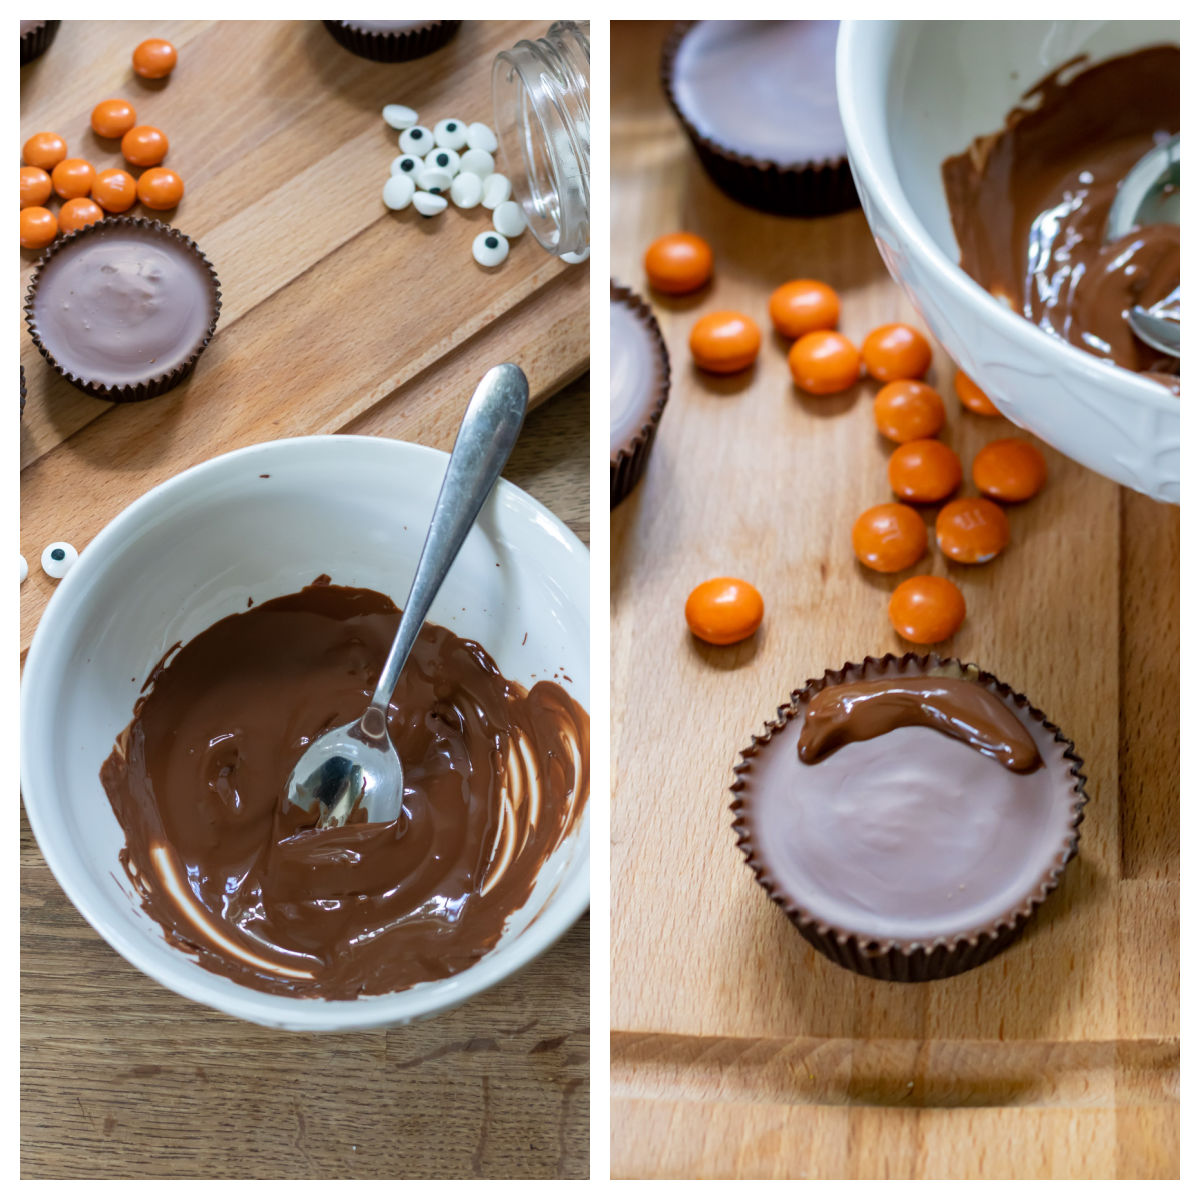 Melting chocolate and spreading on a peanut butter cup.